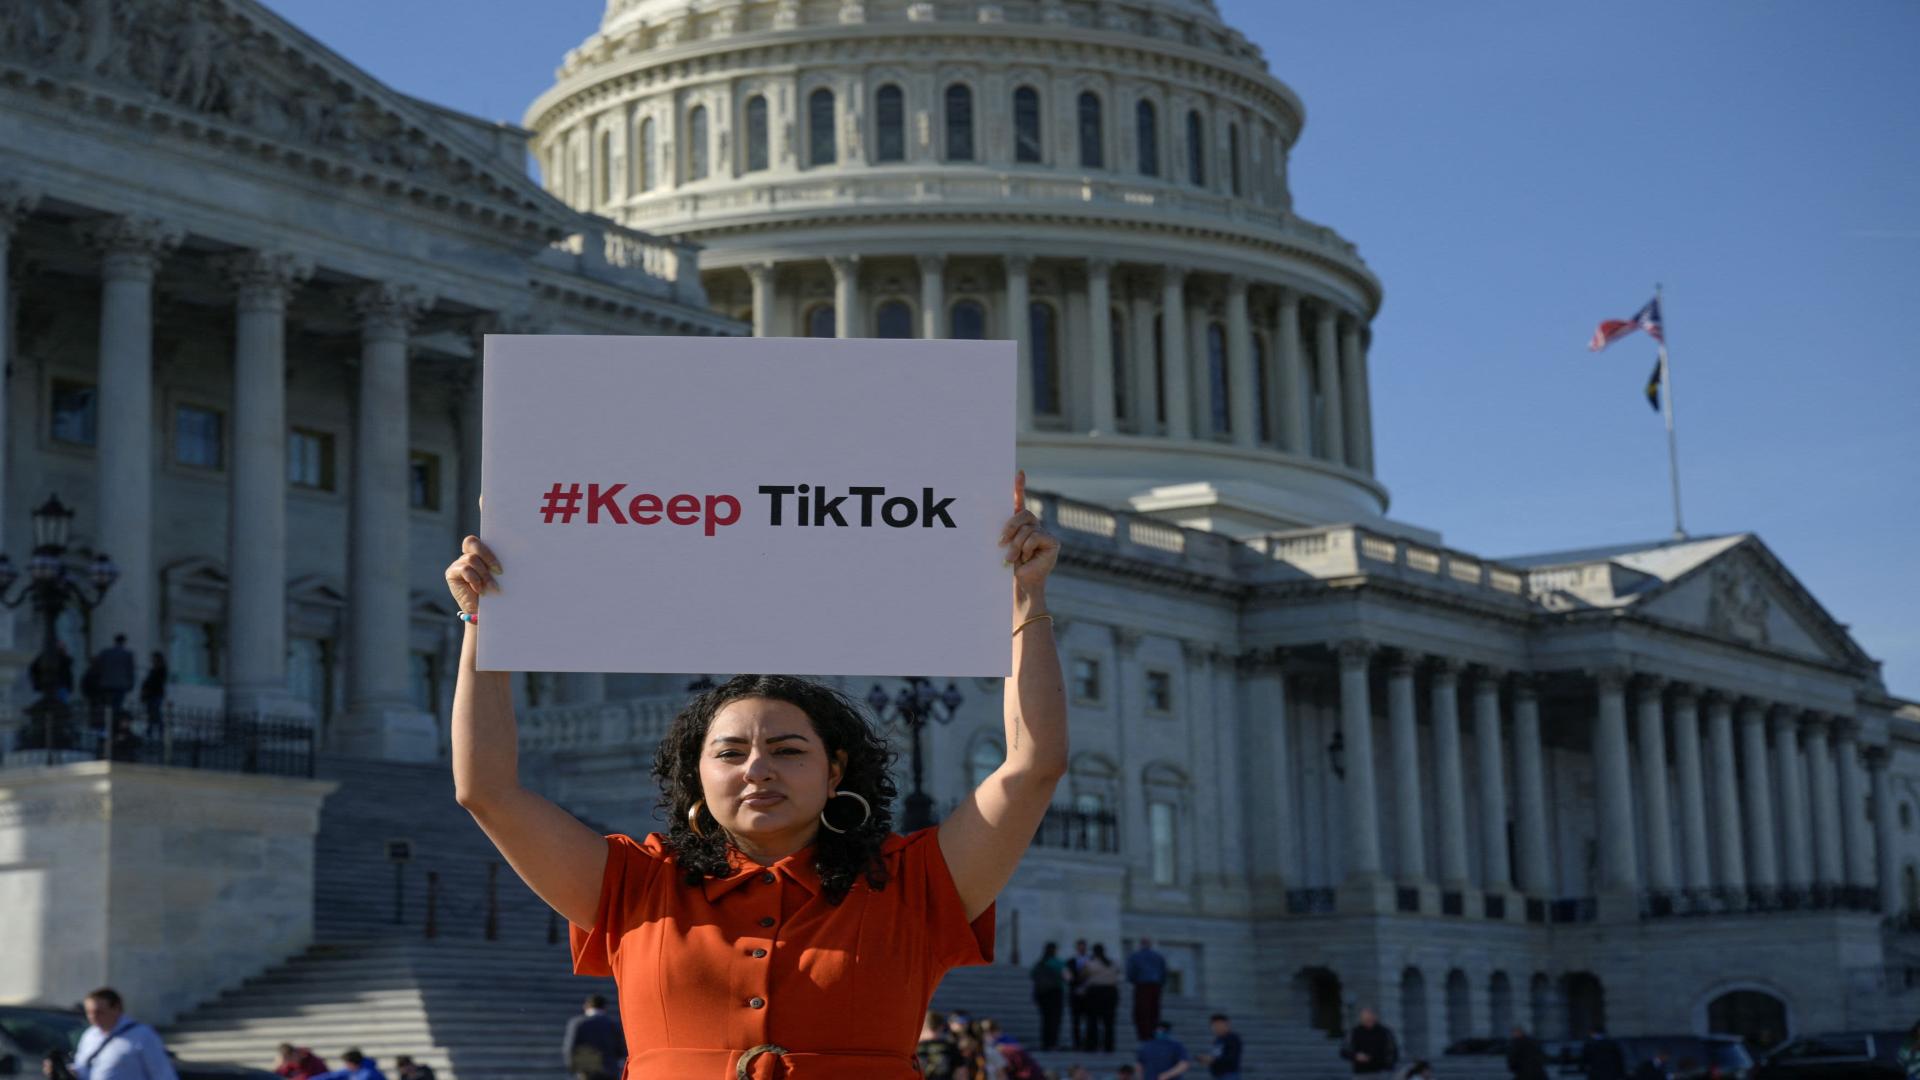 TikTok doubles ad buy to fight potential U.S. ban as Congress moves to fast-track legislation